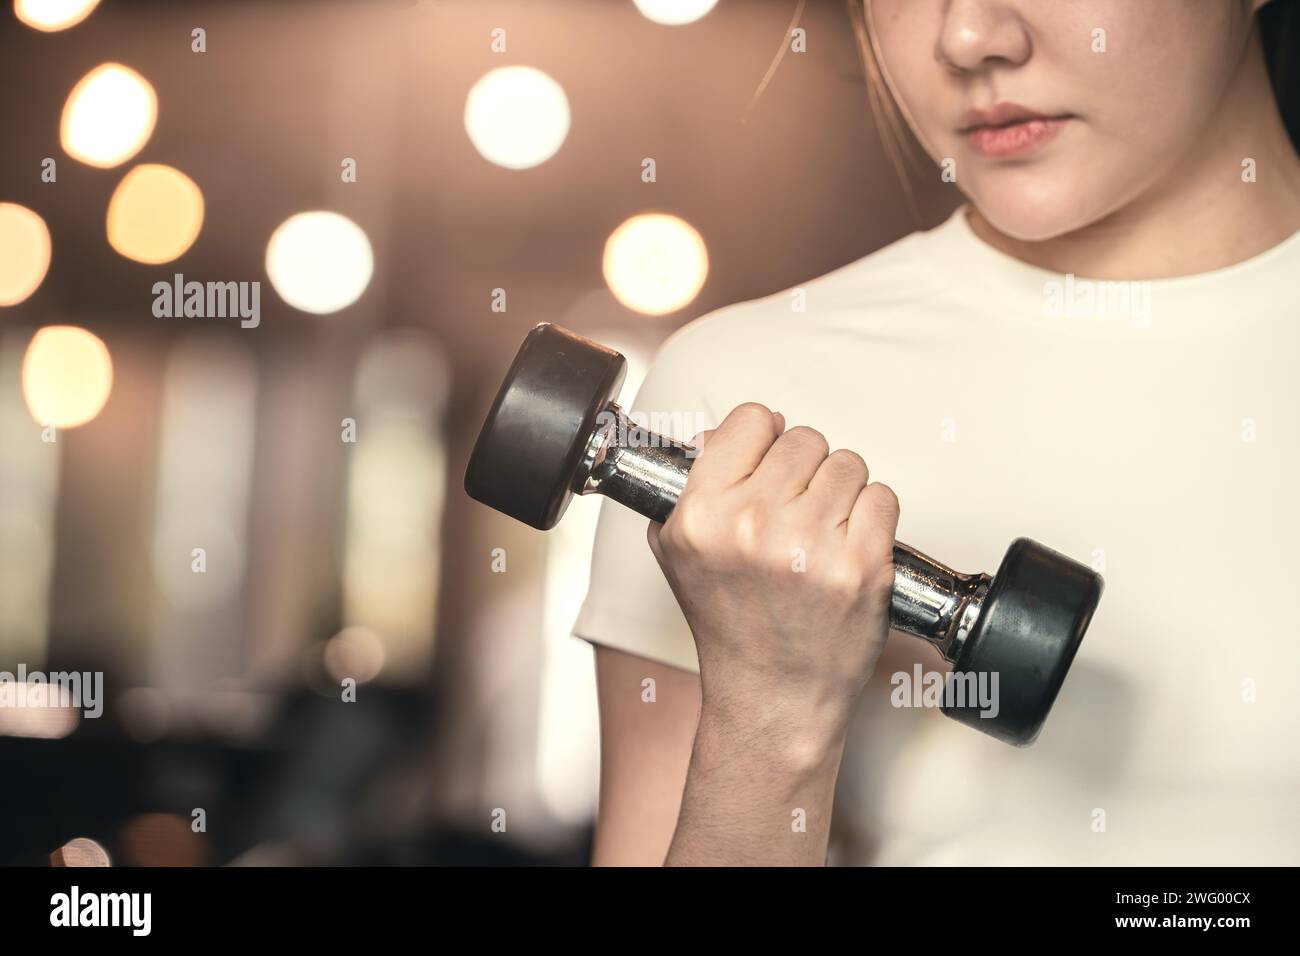 Fitness asian woman doing exercise and lifting dumbbells weights at sport gym. Stock Photo